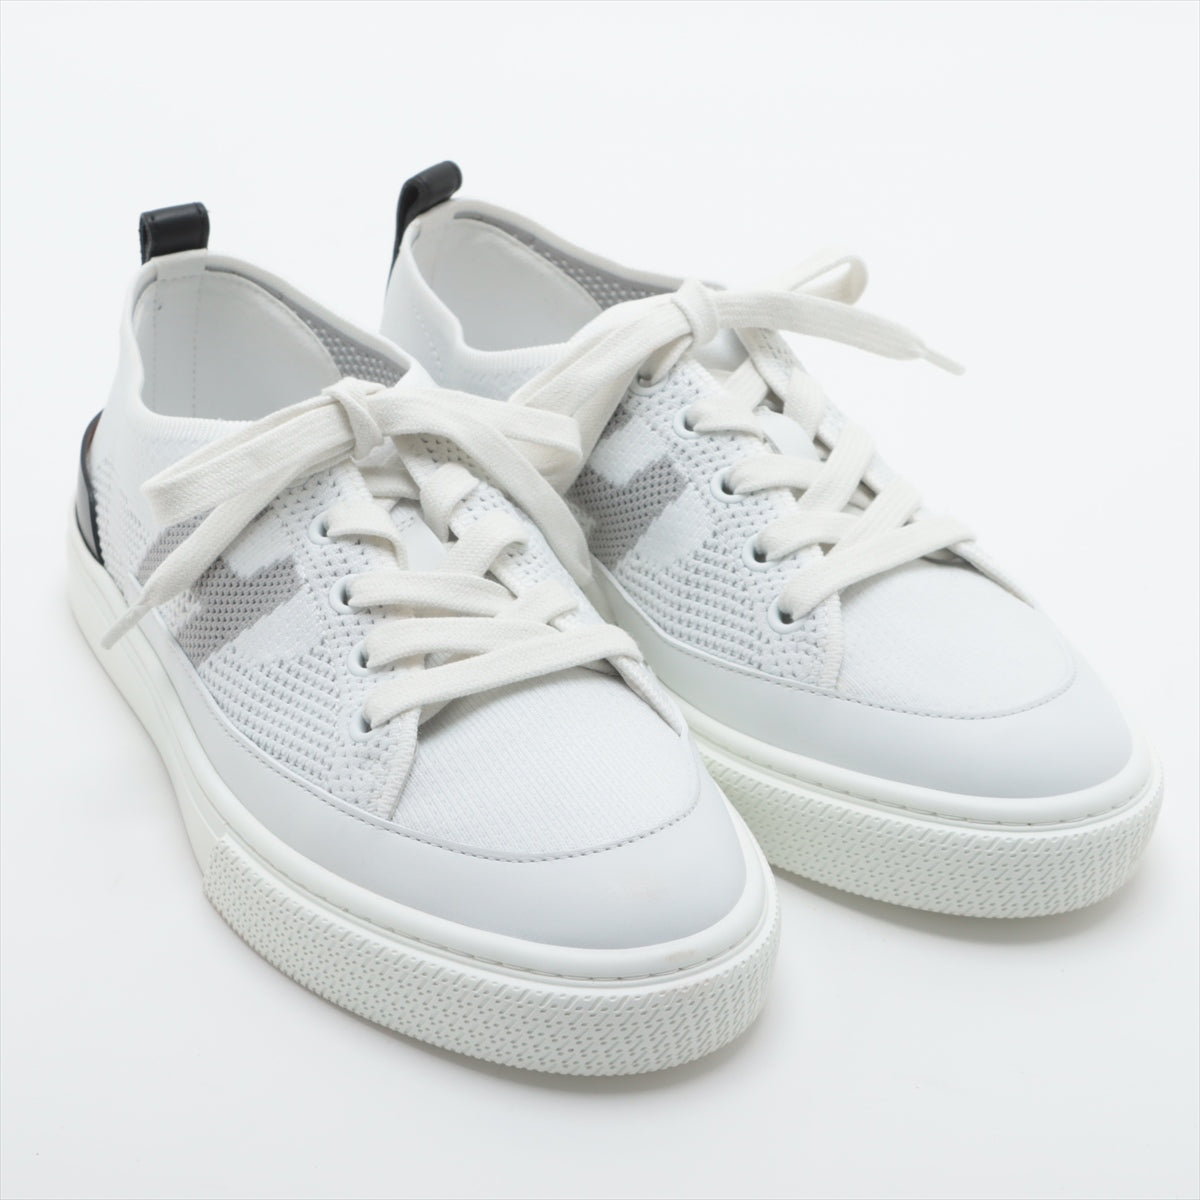 Hermès Leather x fabric Sneakers 36.5 Ladies' Black × White deep Is there a replacement string